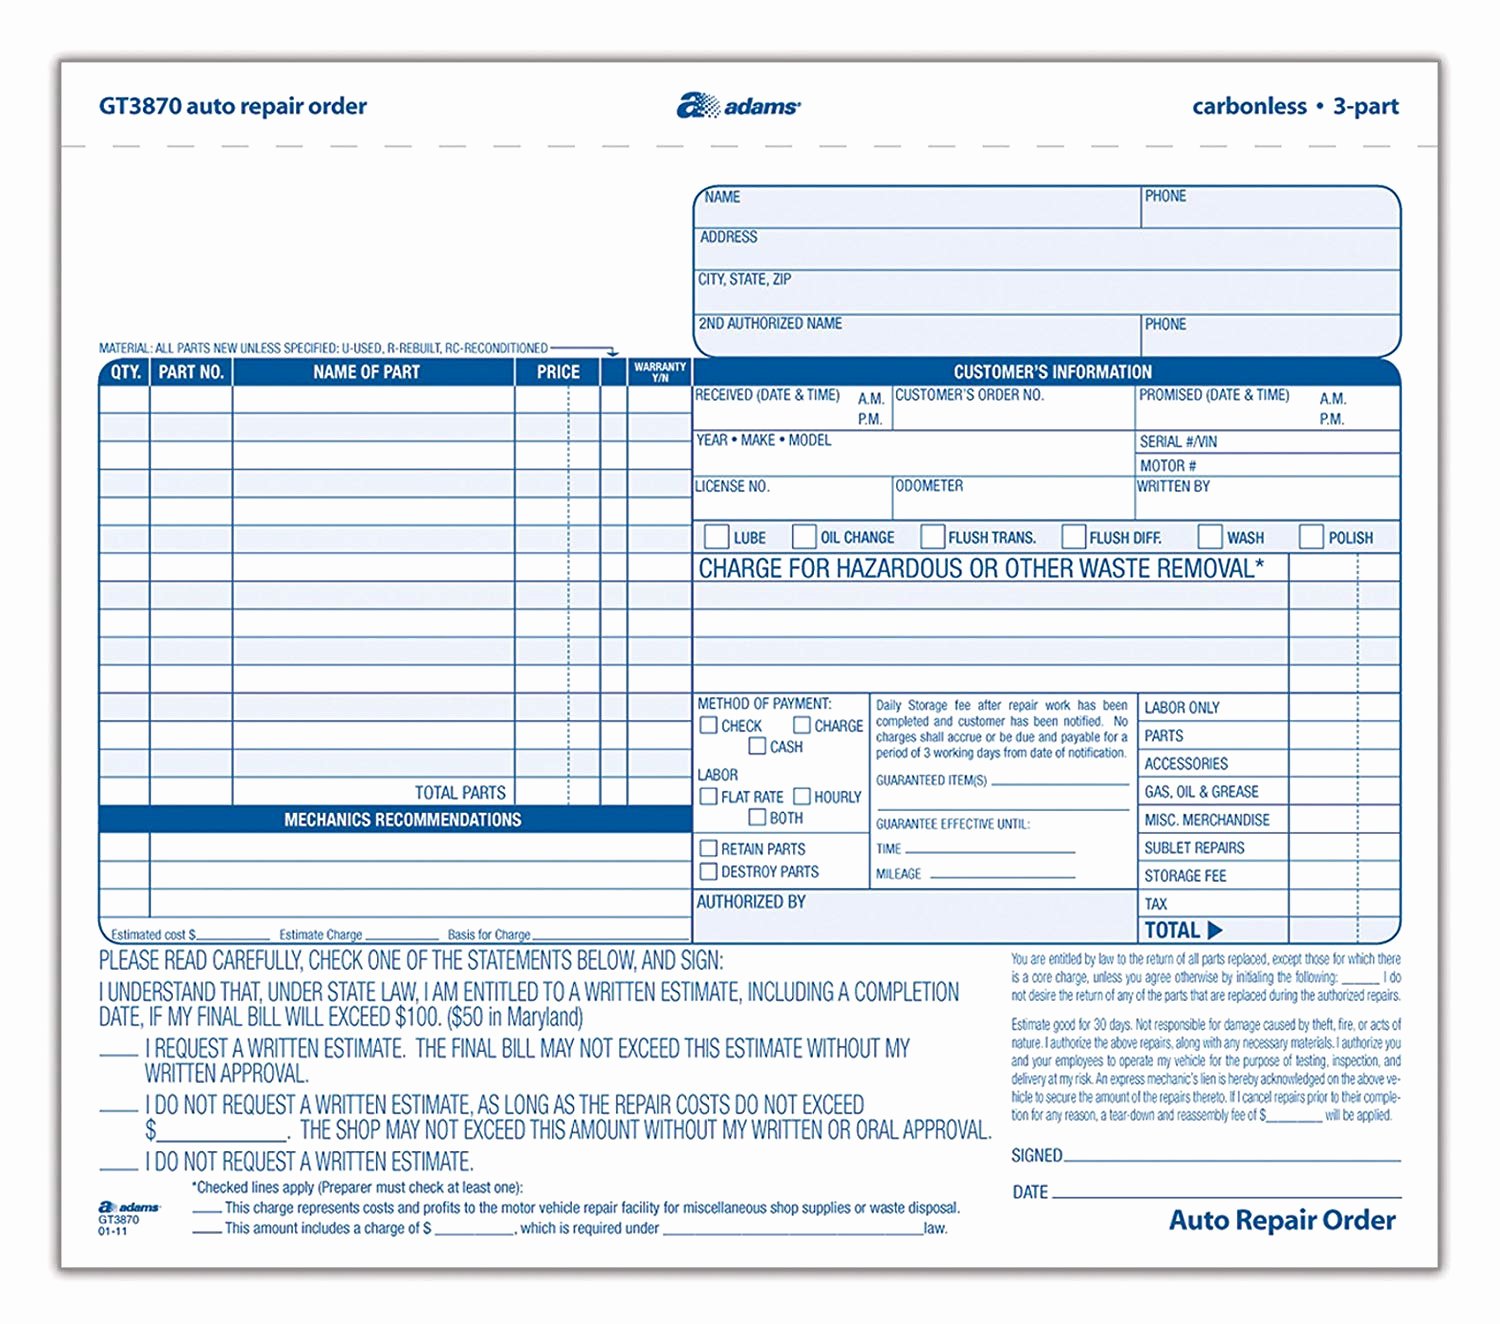 Mechanic Work order Template New Adams Auto Repair order forms 8 5 X 7 44 Inch 3 Part